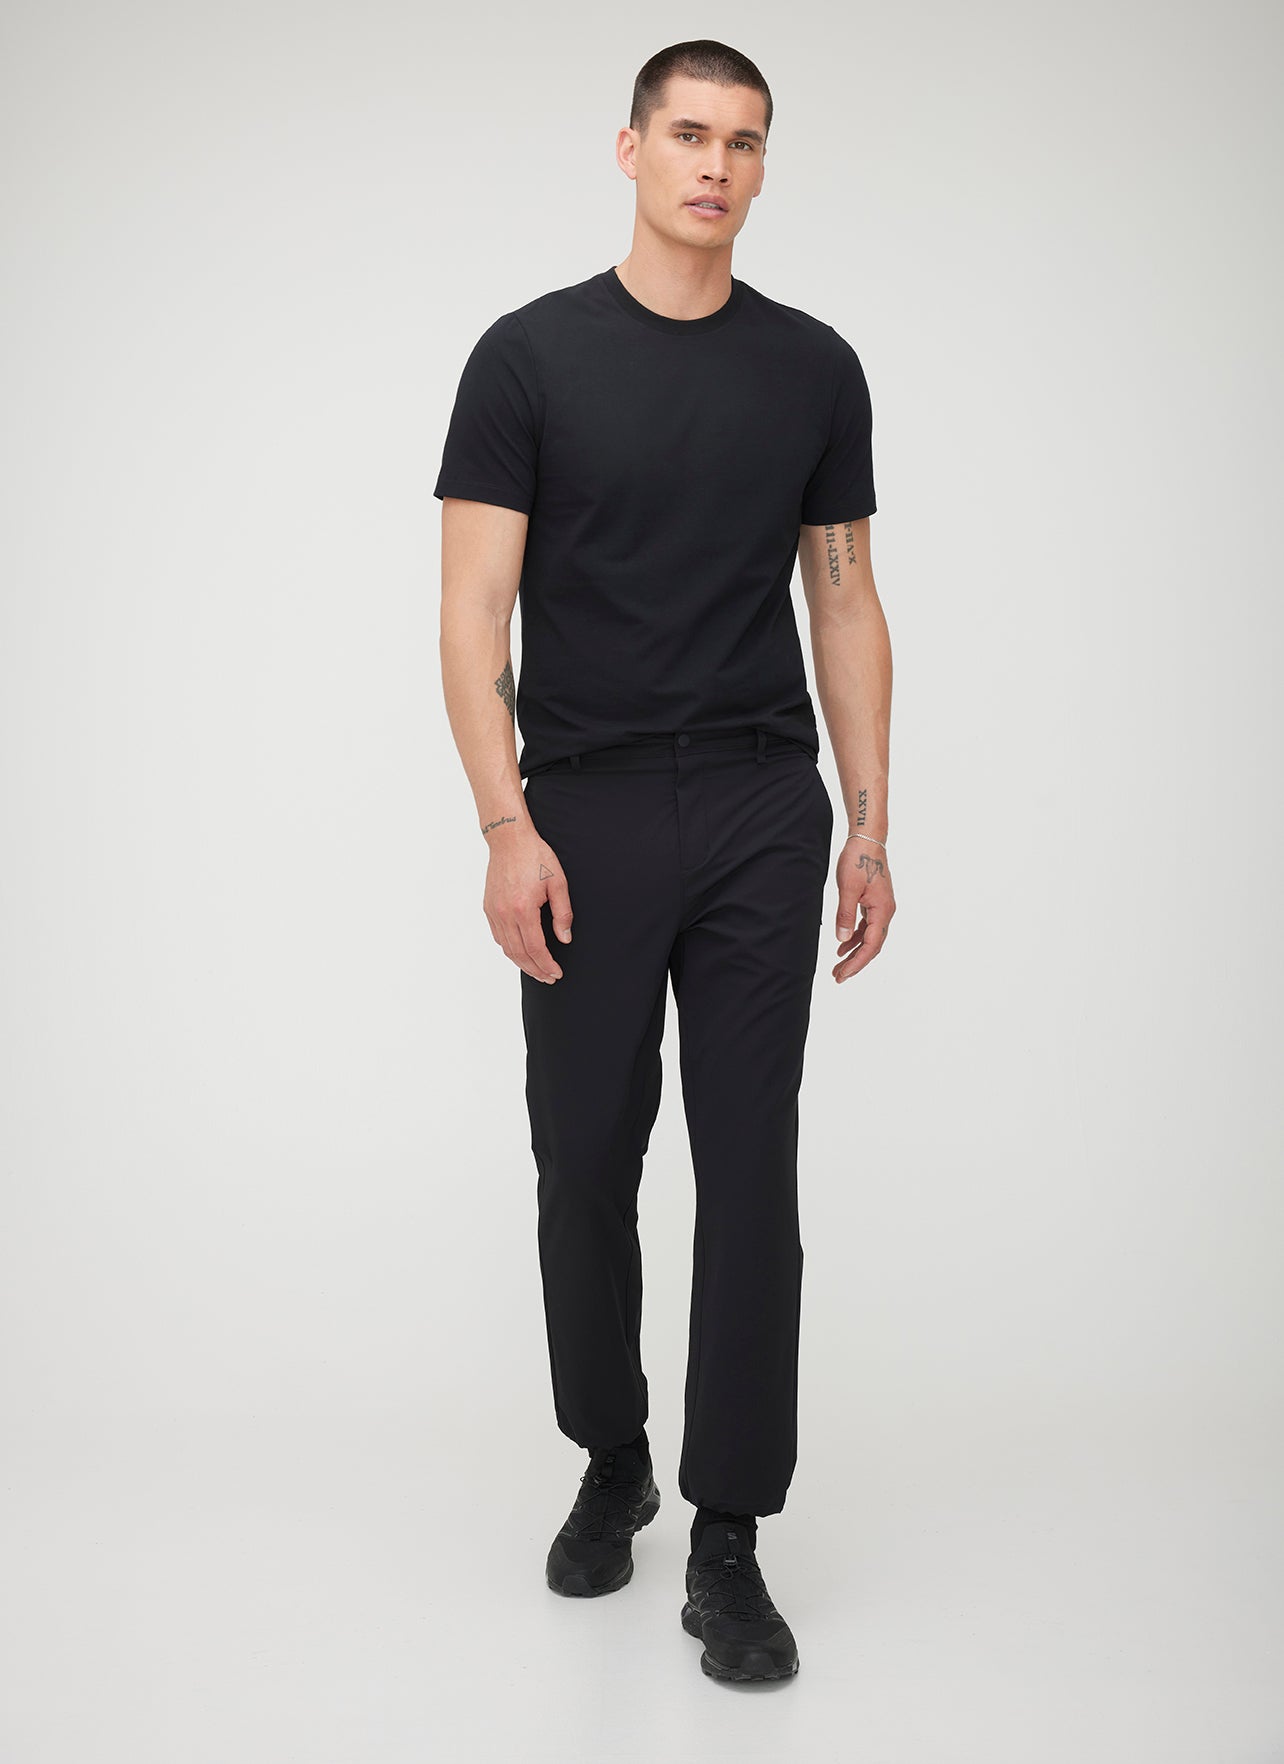 Kit and Ace — Mercer Adventure Pants